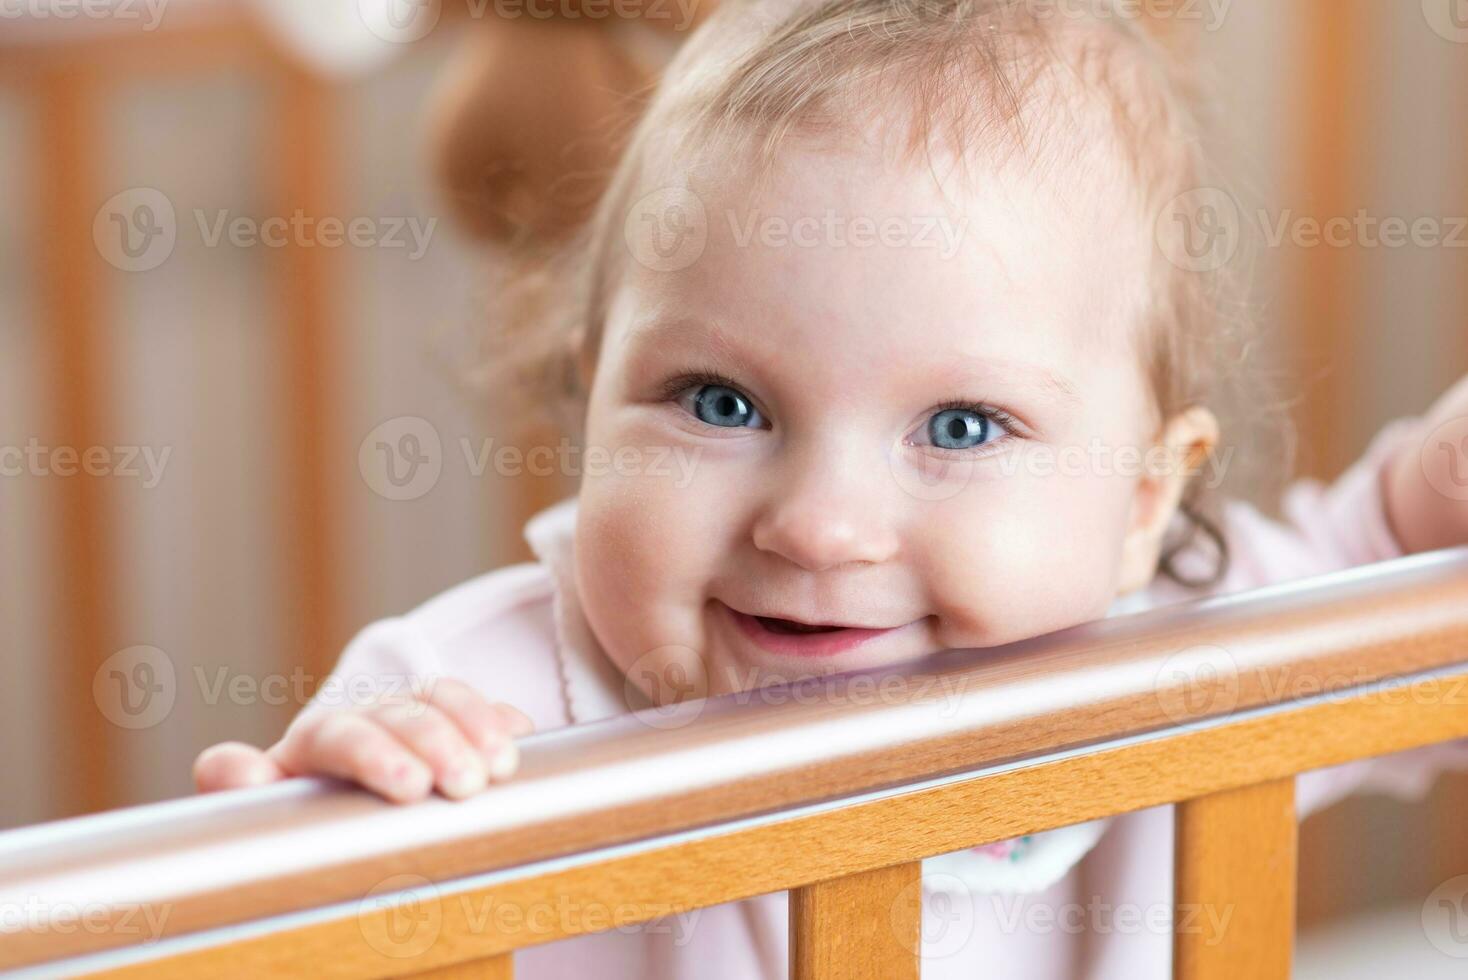 Portrait of a laughing baby who is standing in a crib photo